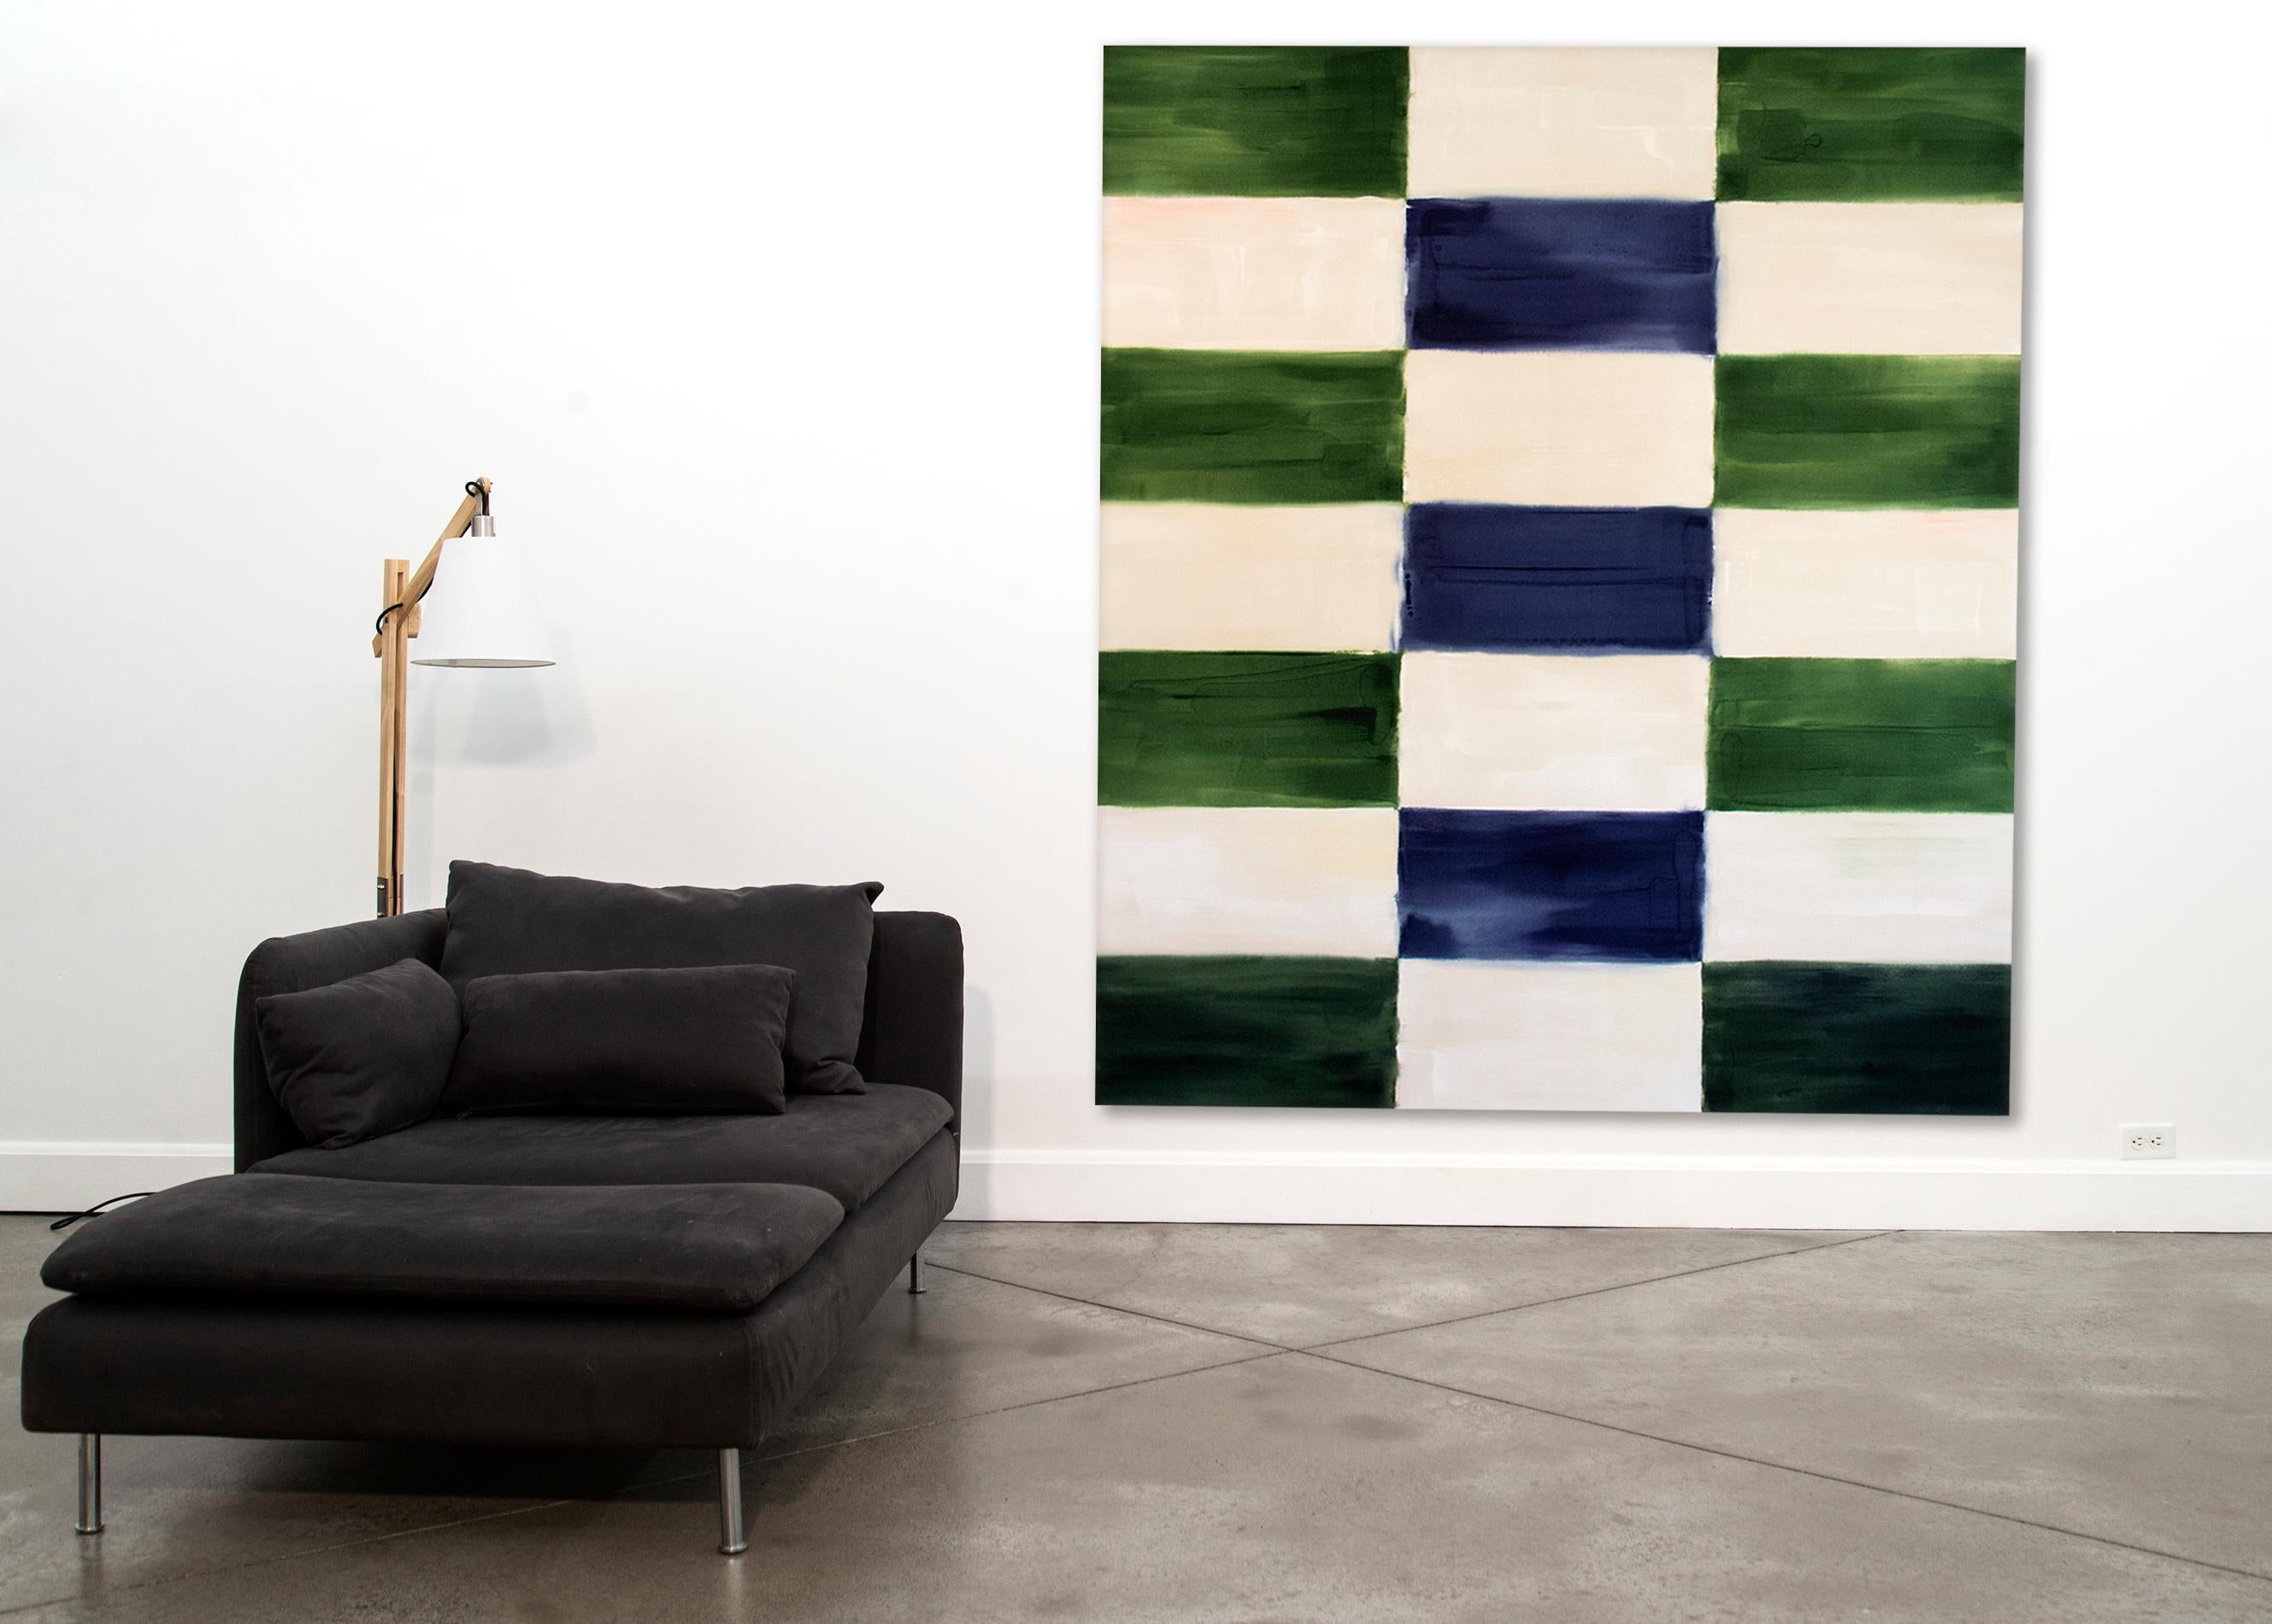 Judd - large, blue, green, abstract, geometric composition, acrylic on canvas - Black Abstract Painting by Milly Ristvedt